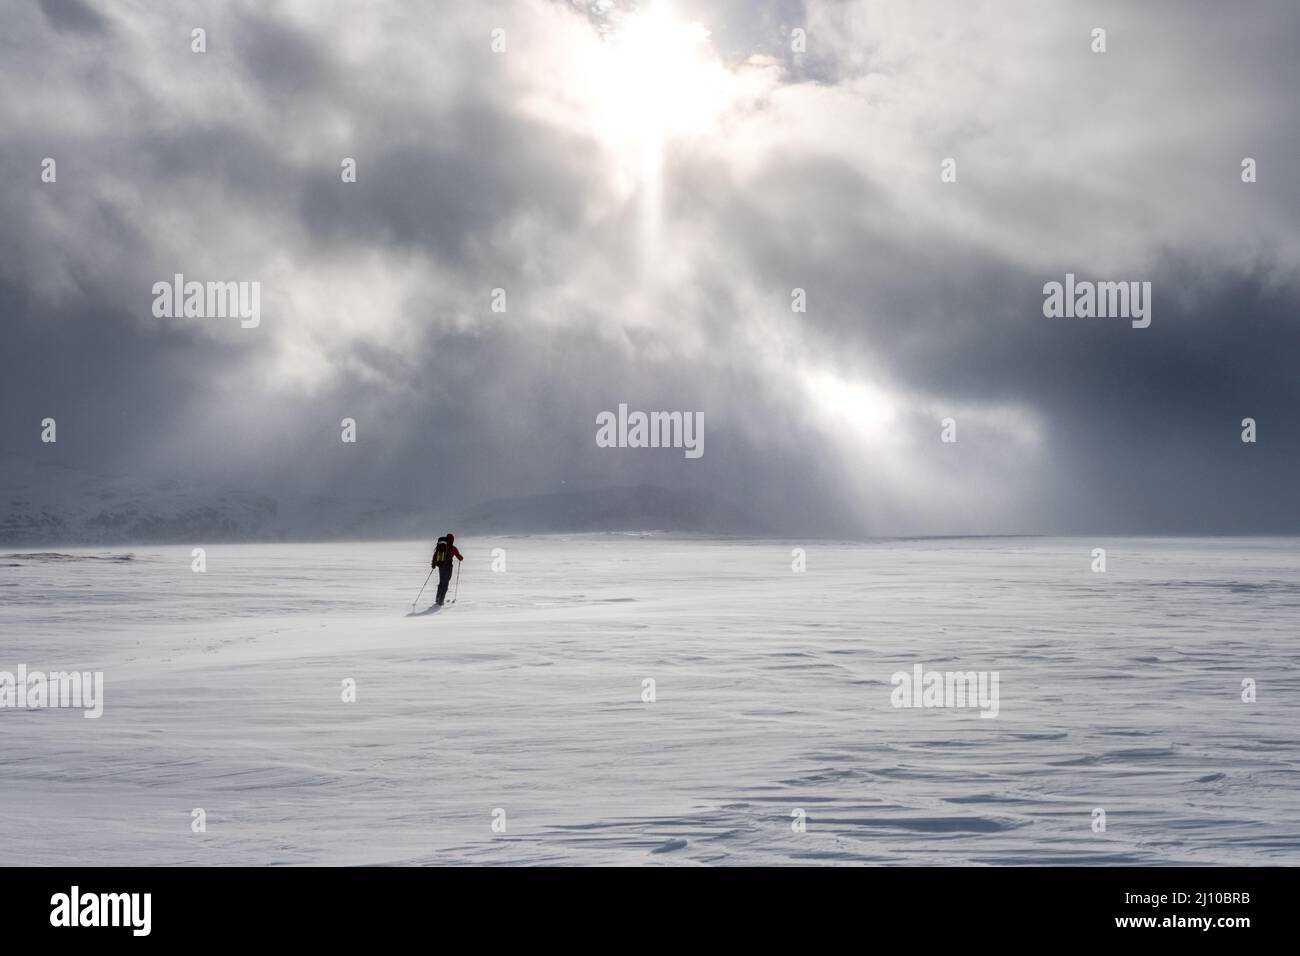 A lone skier Ski touring in the mountains of Norway with a threatening sky ahead Stock Photo